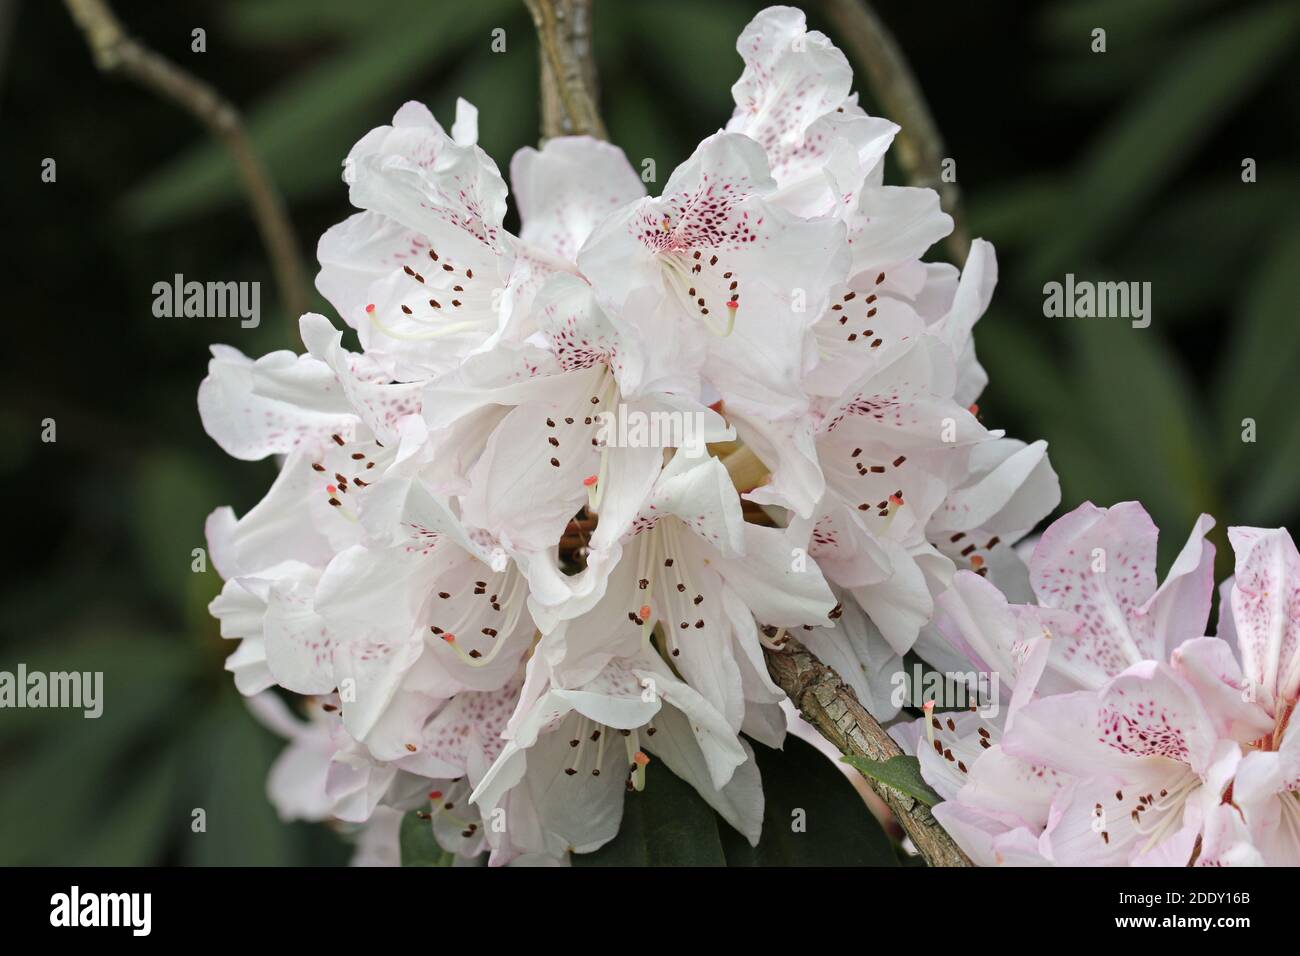 White Rhododendron flower tinged with pink and with pink spots on the inside of the flower with a dark background of leaves. Stock Photo